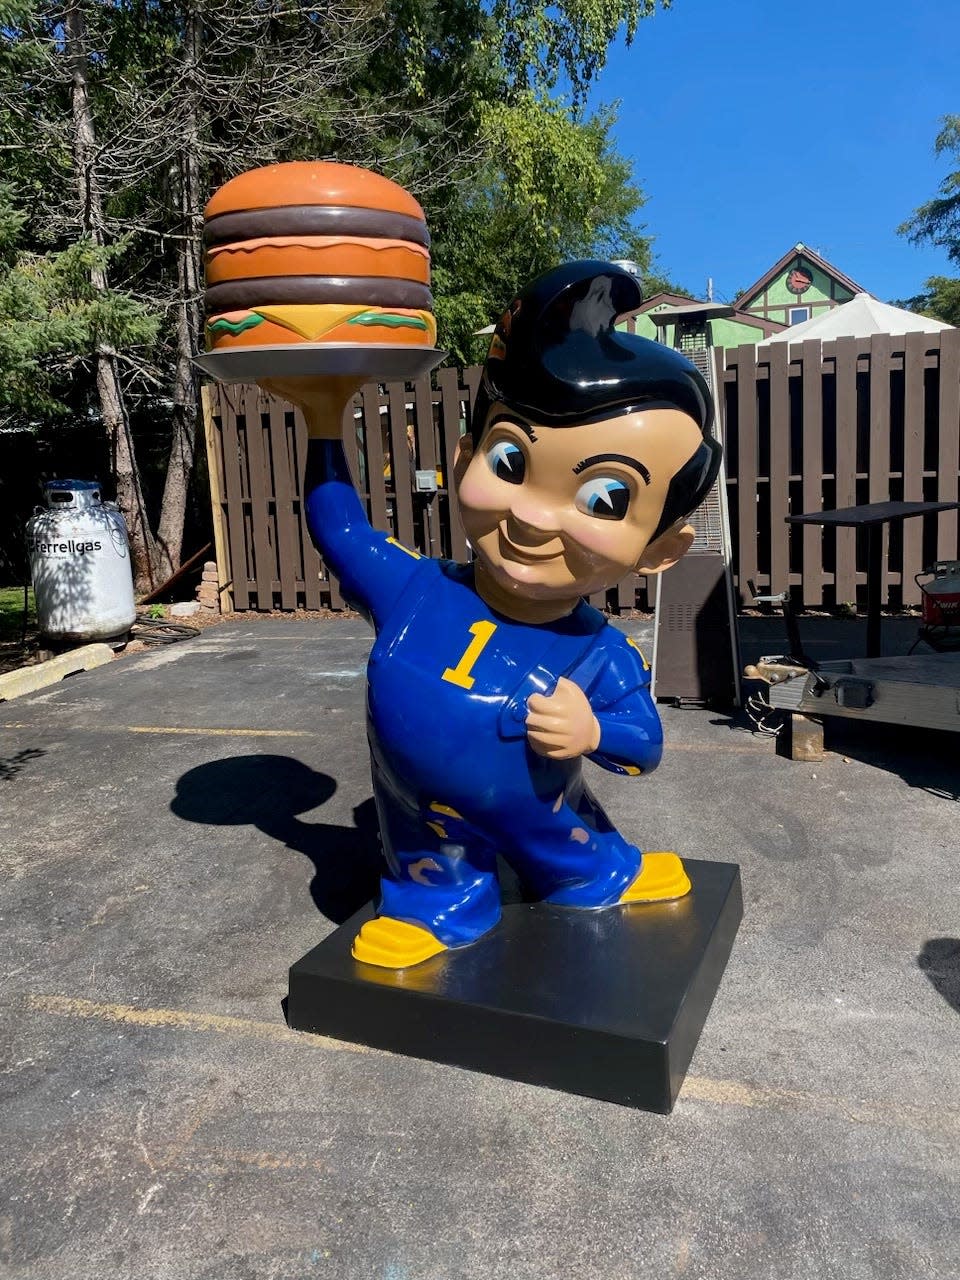 The Big Boy Restaurant Group announced this week a three-year agreement with the University of Michigan to operate a Big Boy restaurant inside the Big House and install its iconic statue, but wearing Michigan football colors.